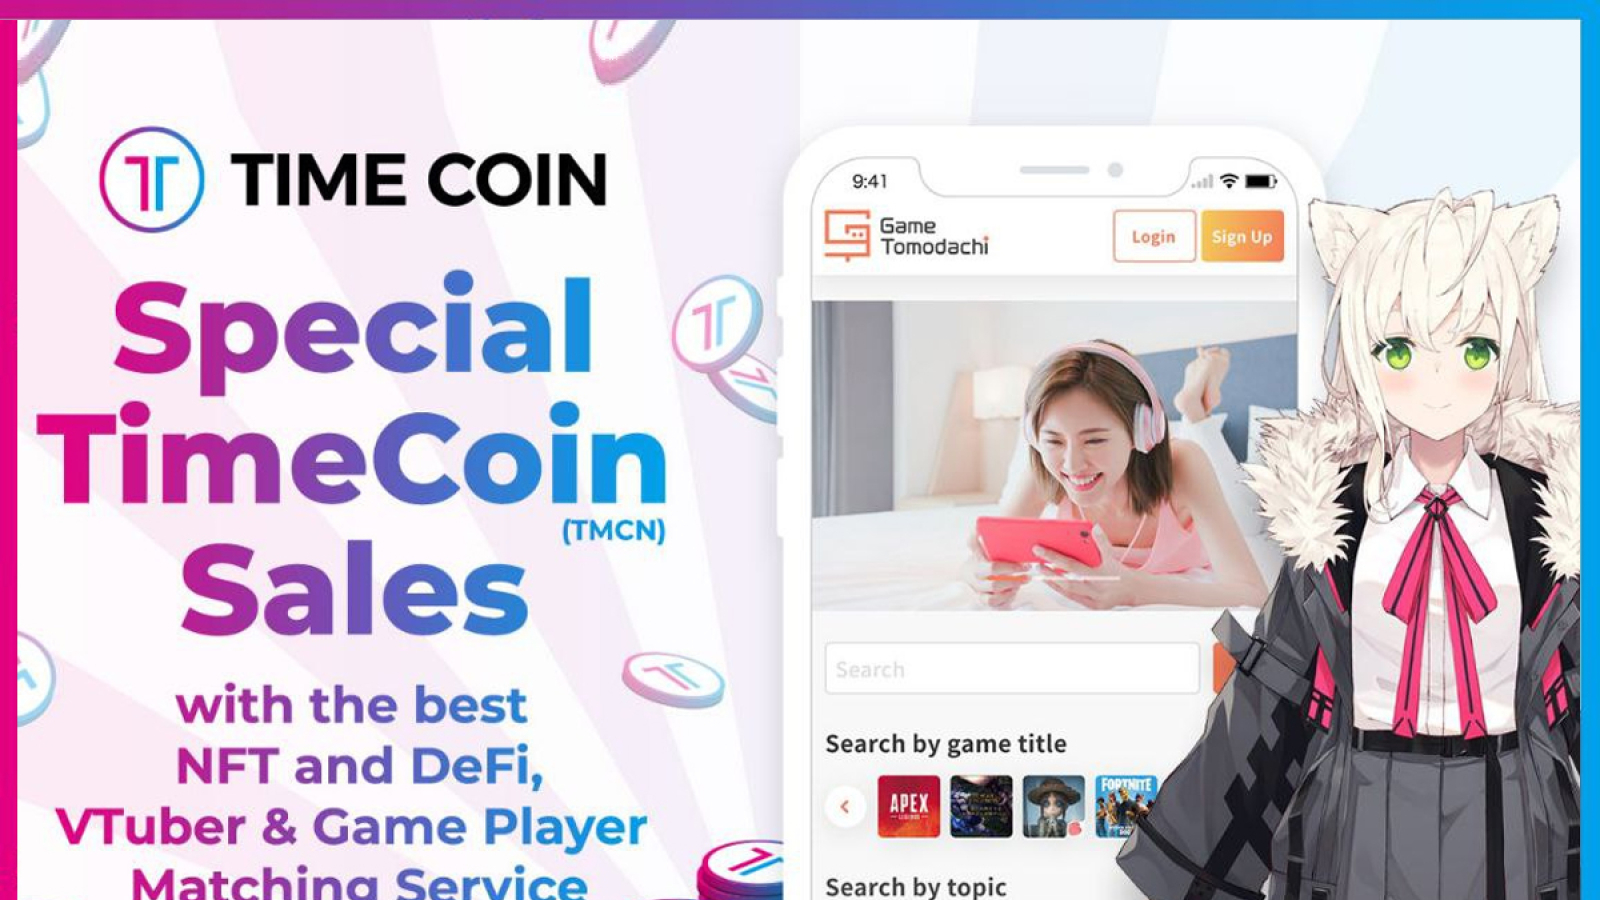 Special TimeCoin(TMCN) Sales with the best NFT and DeFi, VTuber & Game Player Matching Service